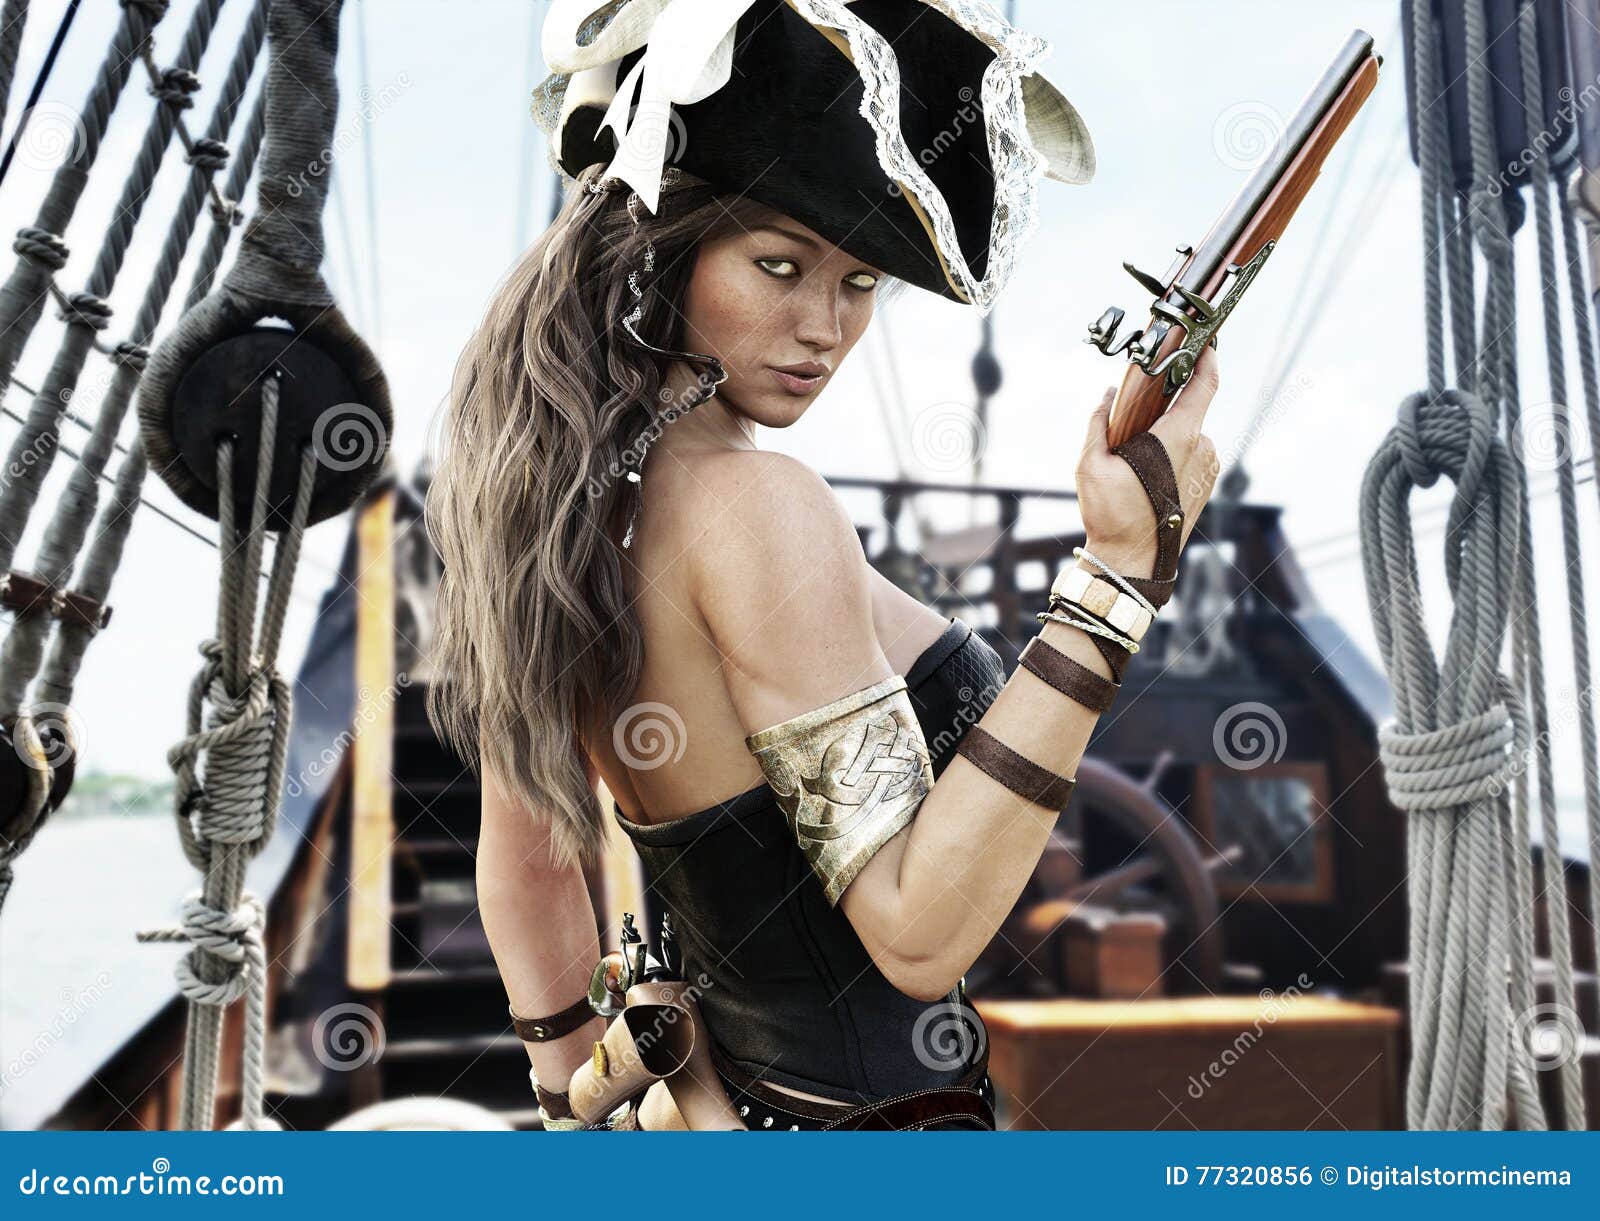 Pirate Female Posing With A Cutlass Sword And Pistol On A Gradient Background Royalty Free